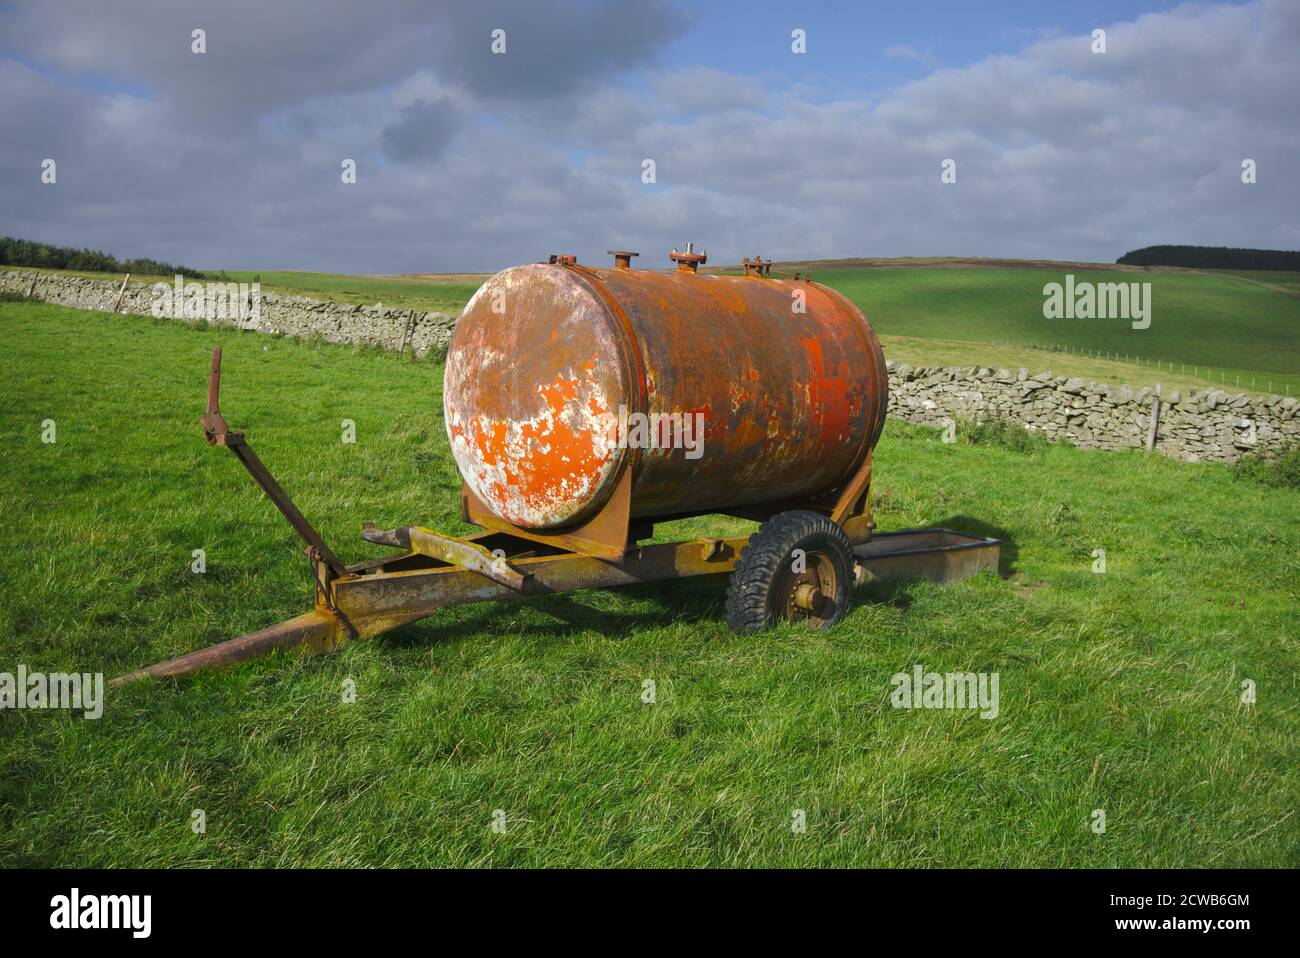 Old cylindrical manure spreader in a field in Berwickshire, Scottish Borders, UK, next to a dry stone wall. Stock Photo